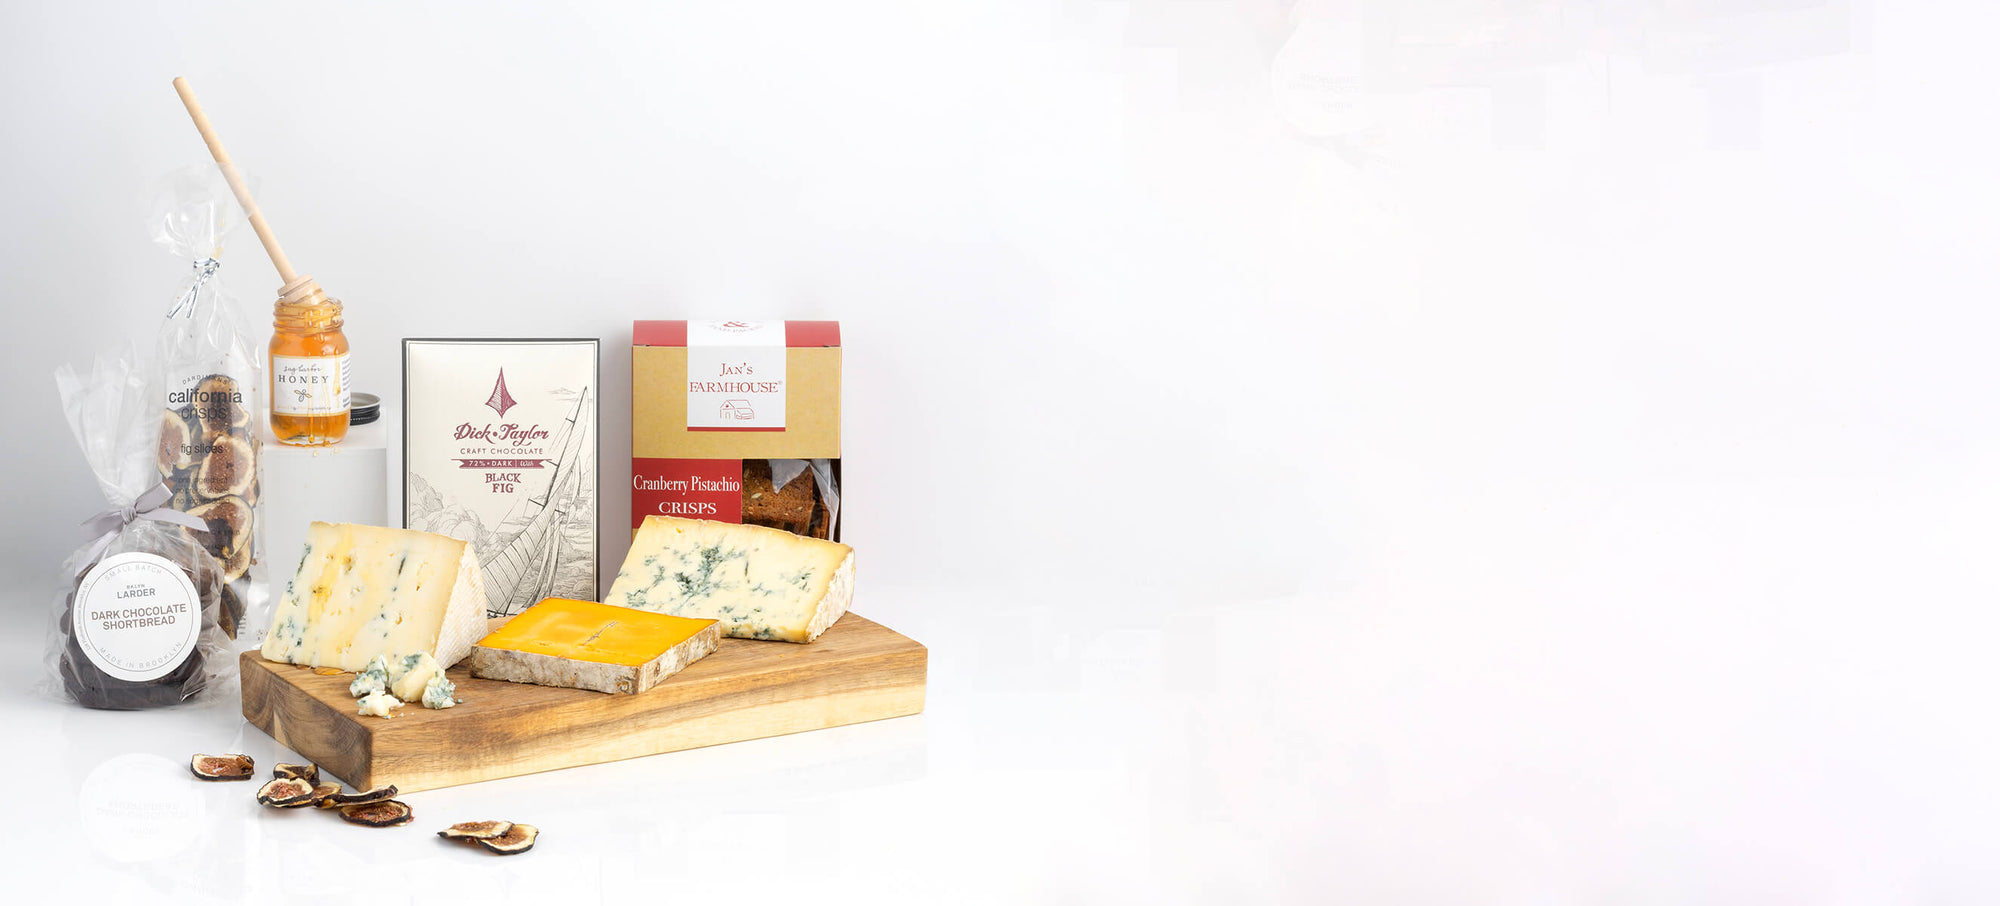 A beautiful cheese and provisions spread